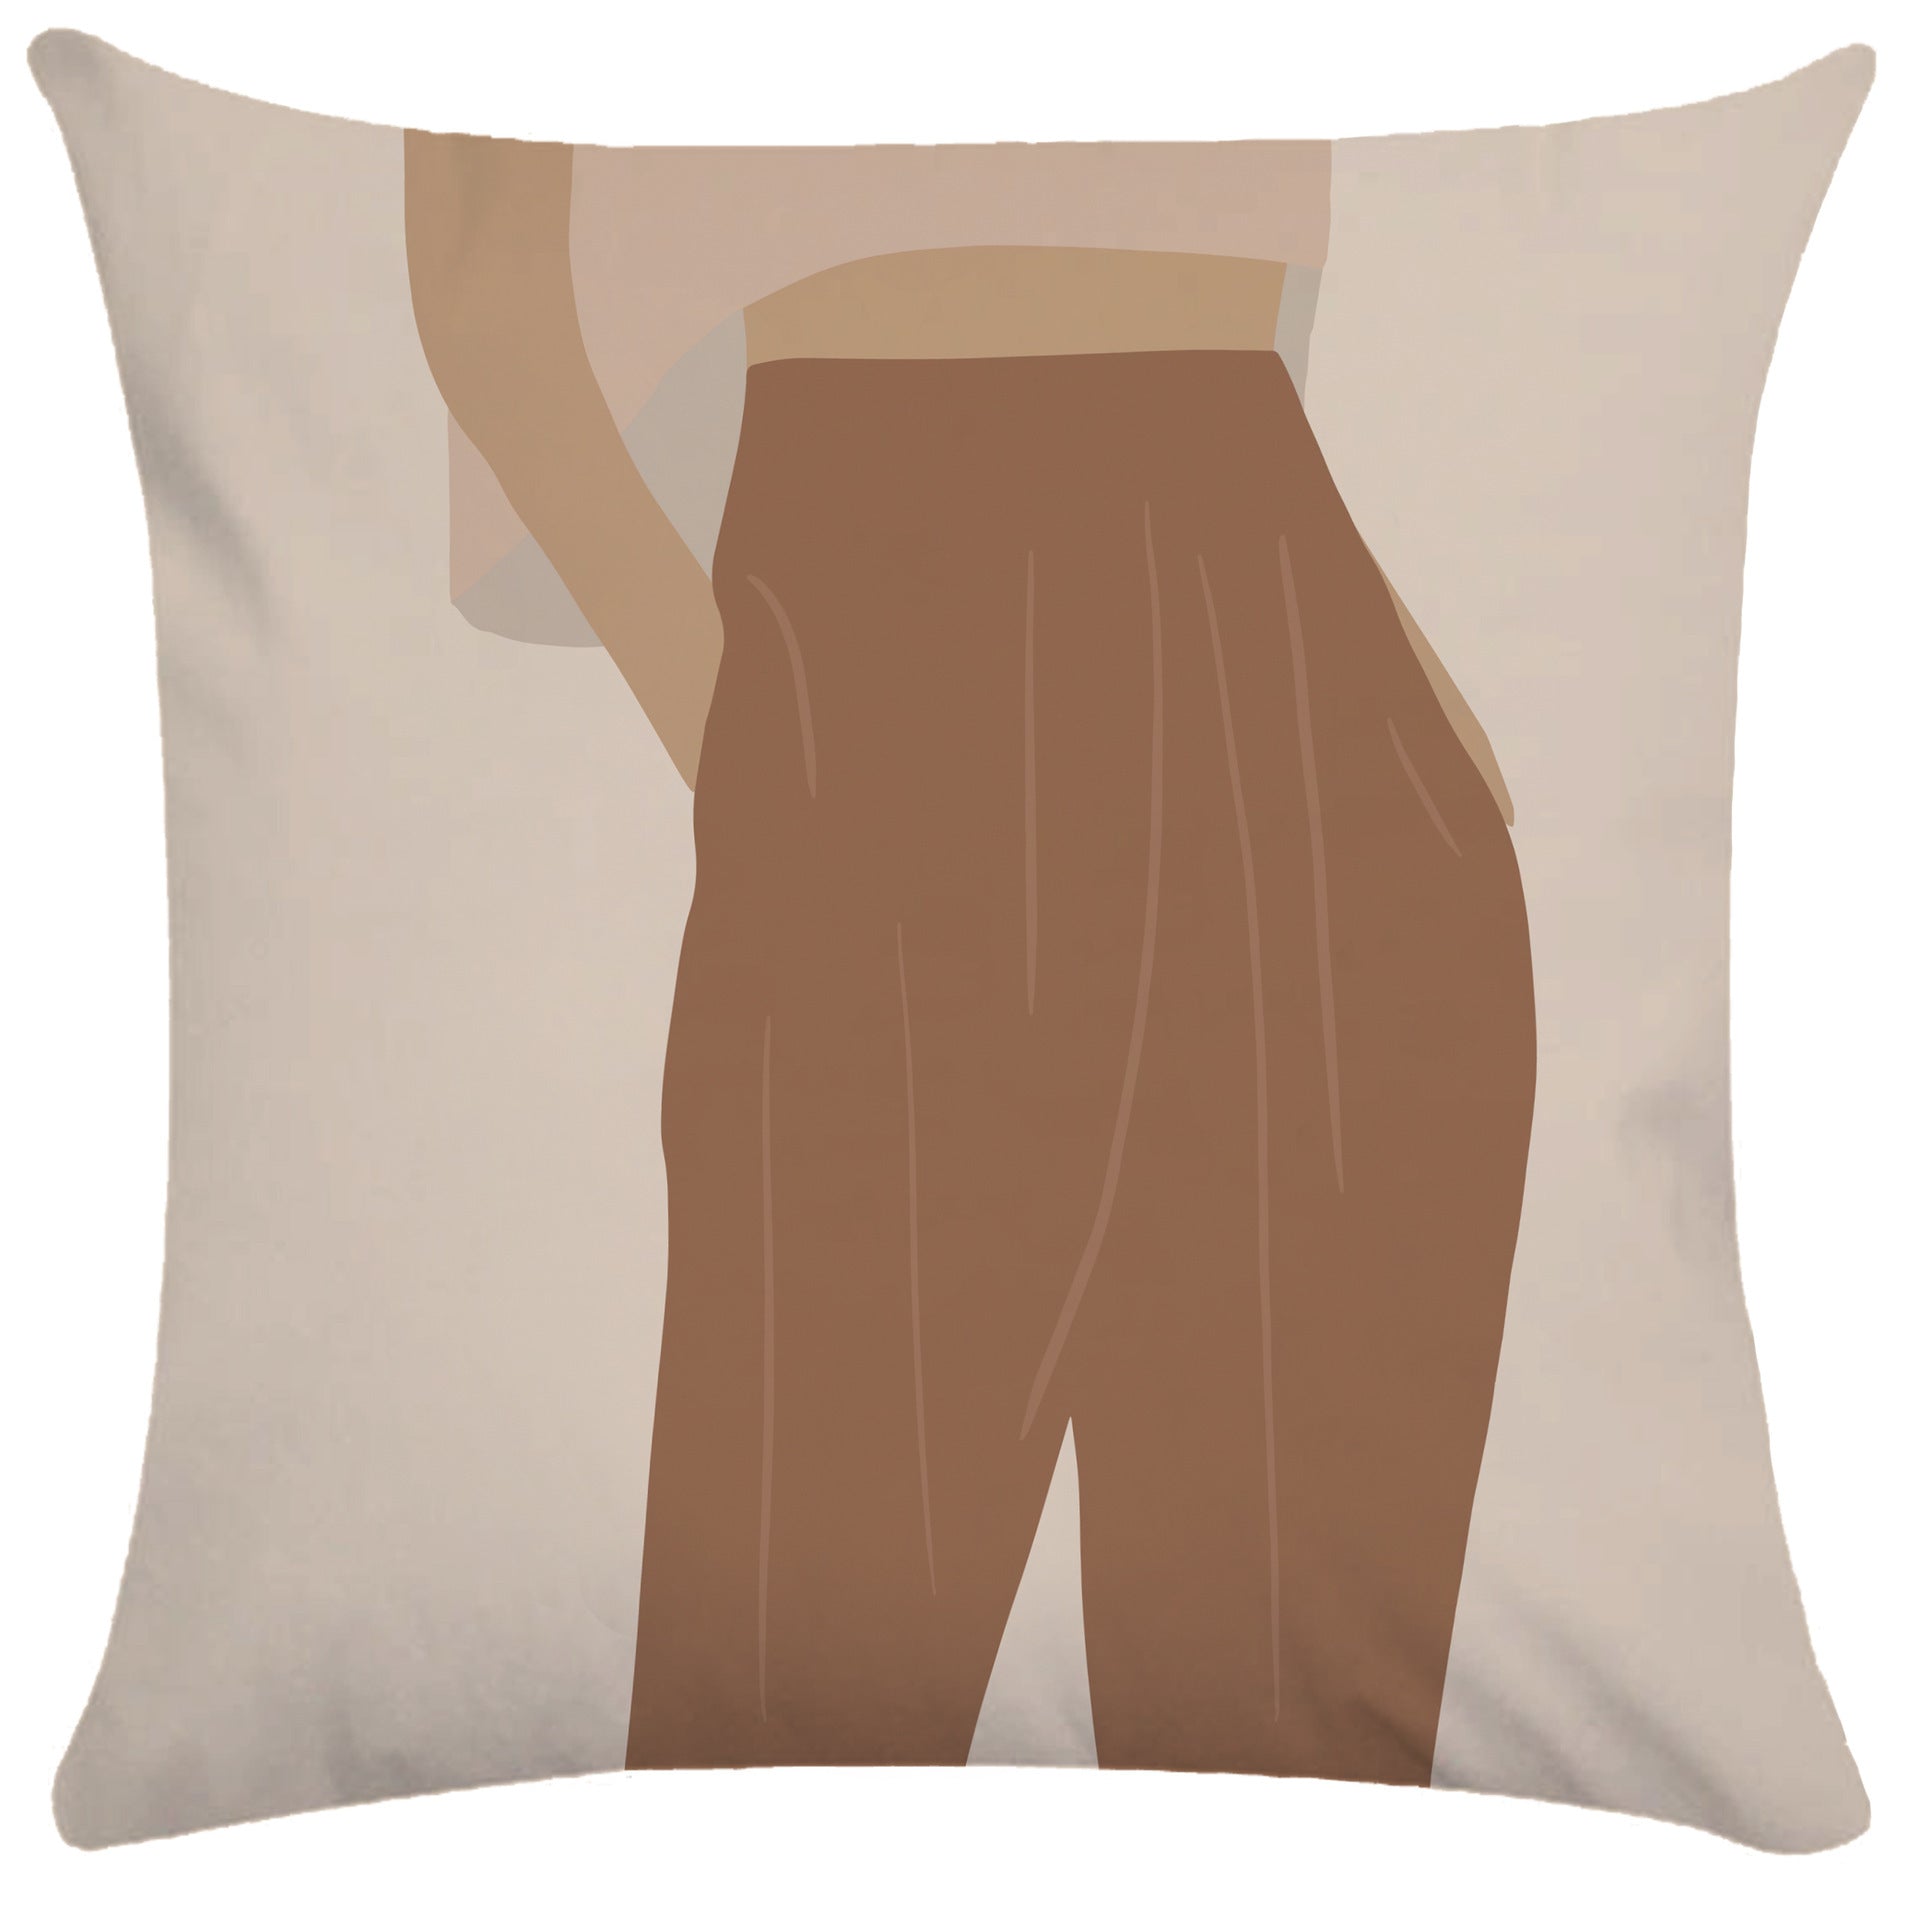 Pillowcase With An Abstract Design